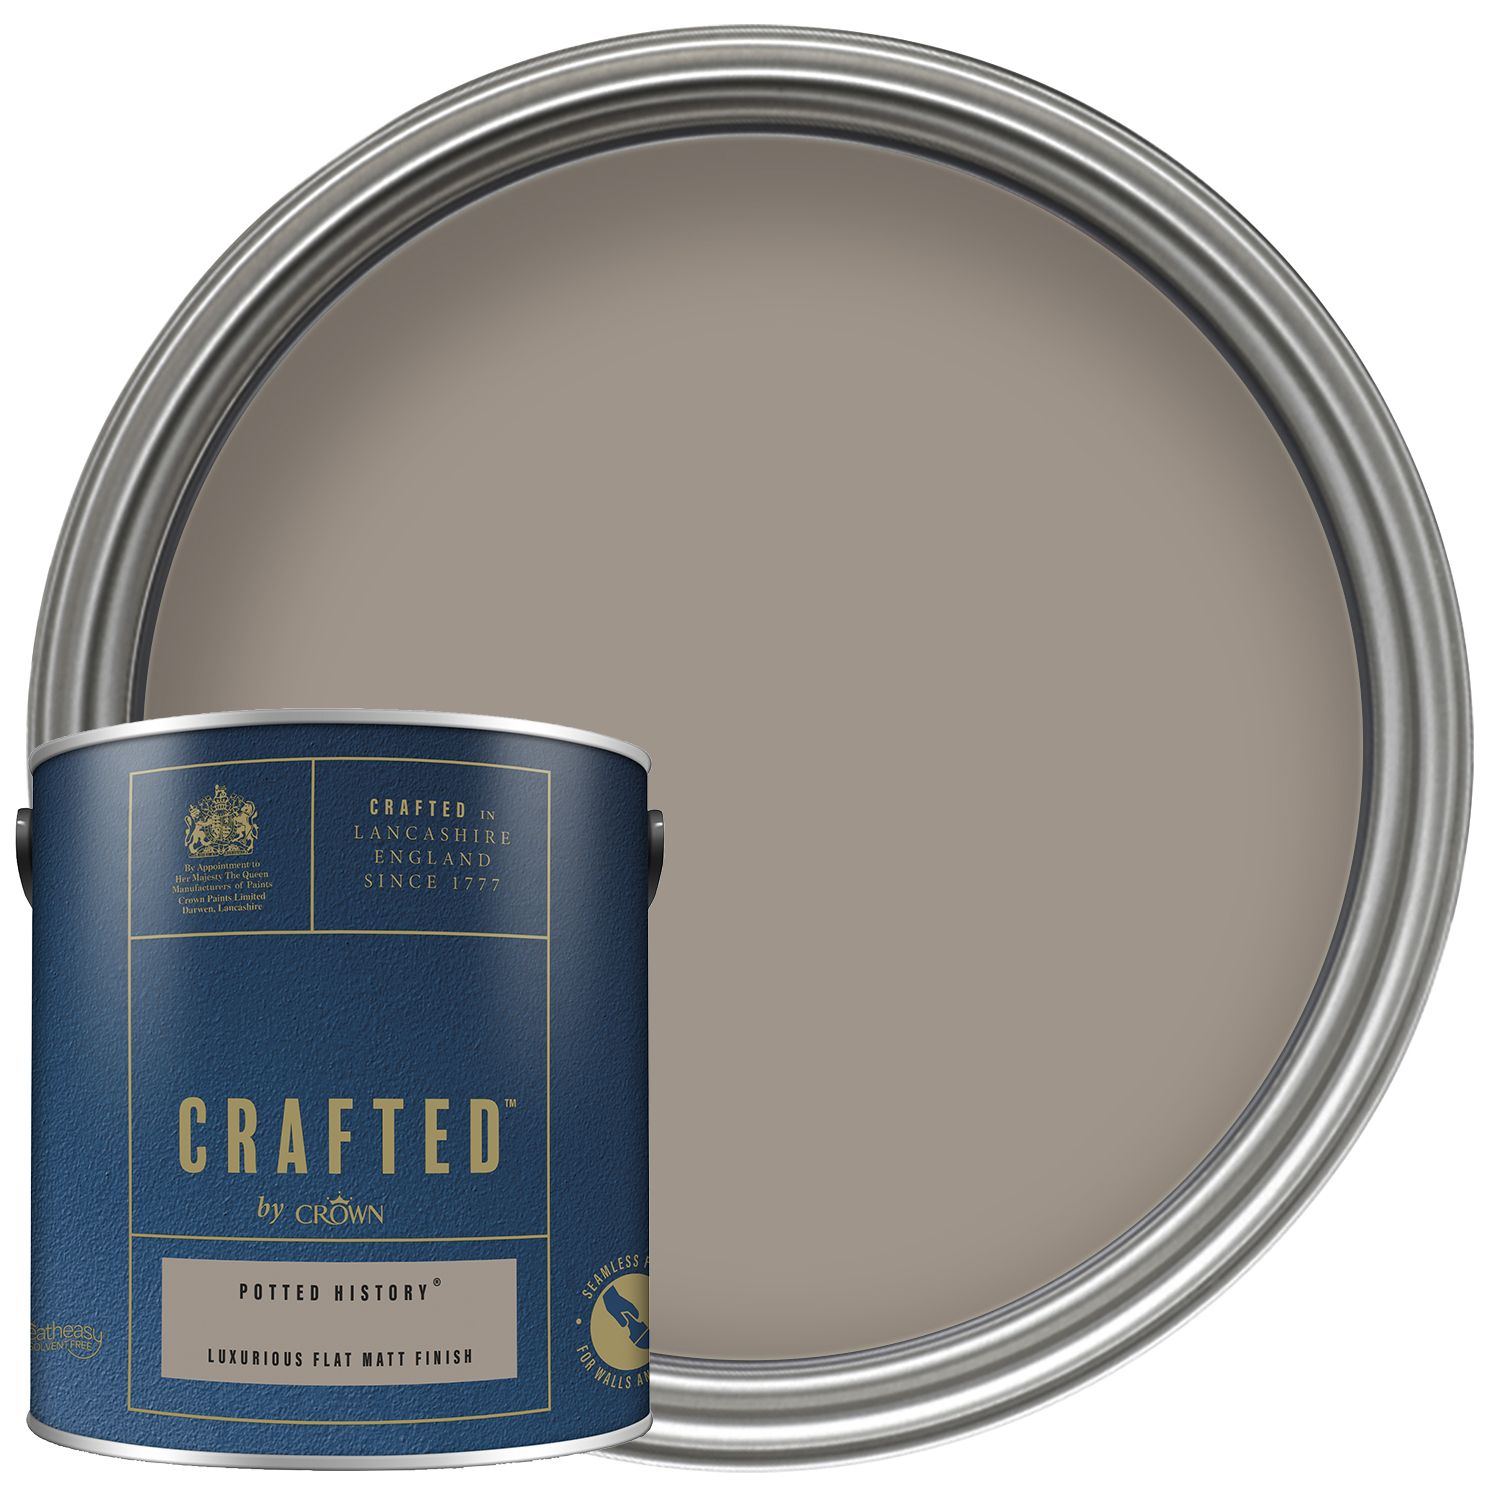 Image of CRAFTED™ by Crown Flat Matt Emulsion Interior Paint - Potted History™ - 2.5L